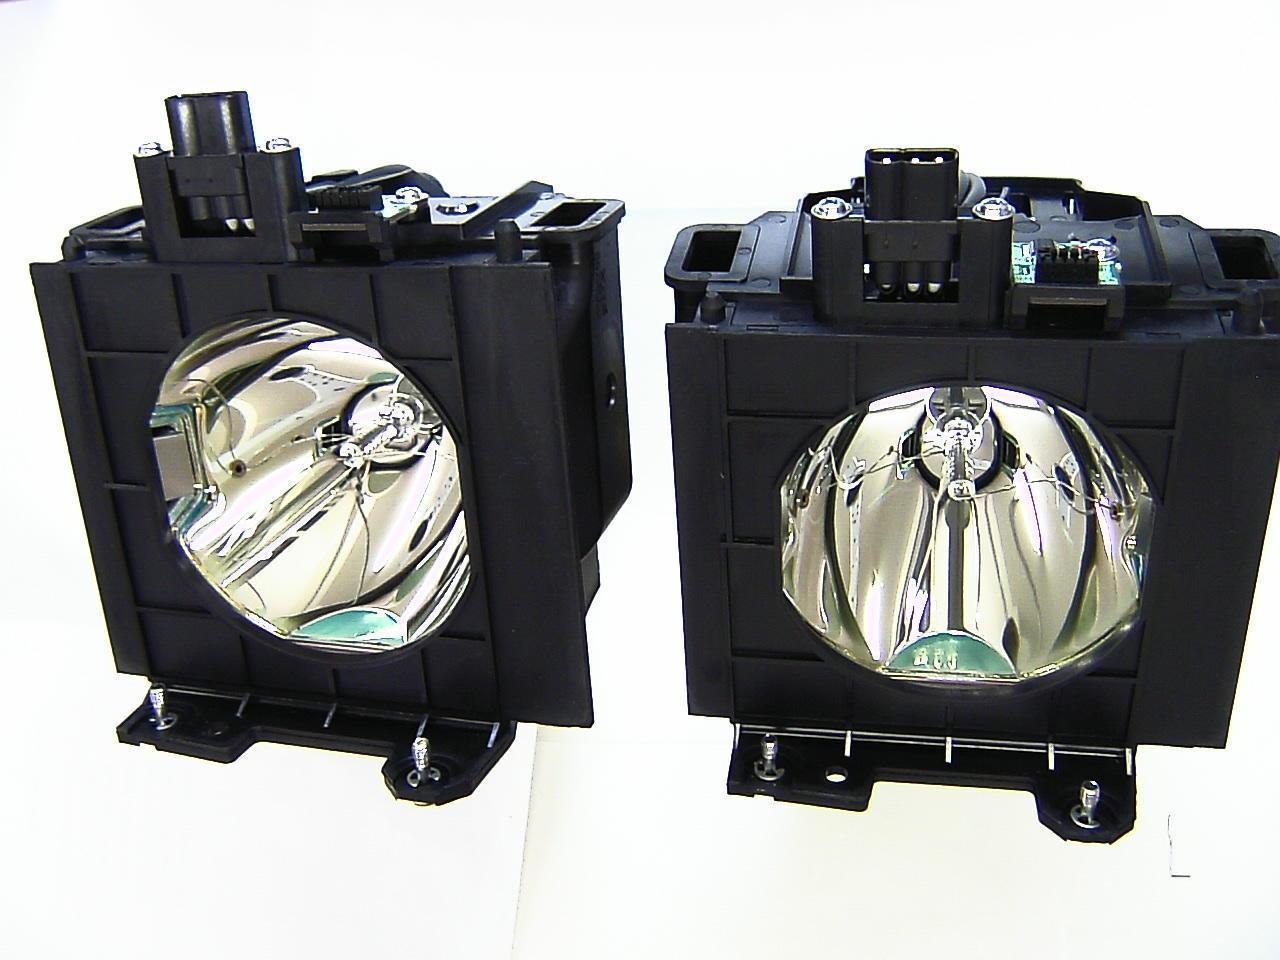 PT-D5700 Panasonic Twin-Pack Projector Lamp Replacement (contains two lamps). Projector Lamp Assembly with High Quality OEM Com